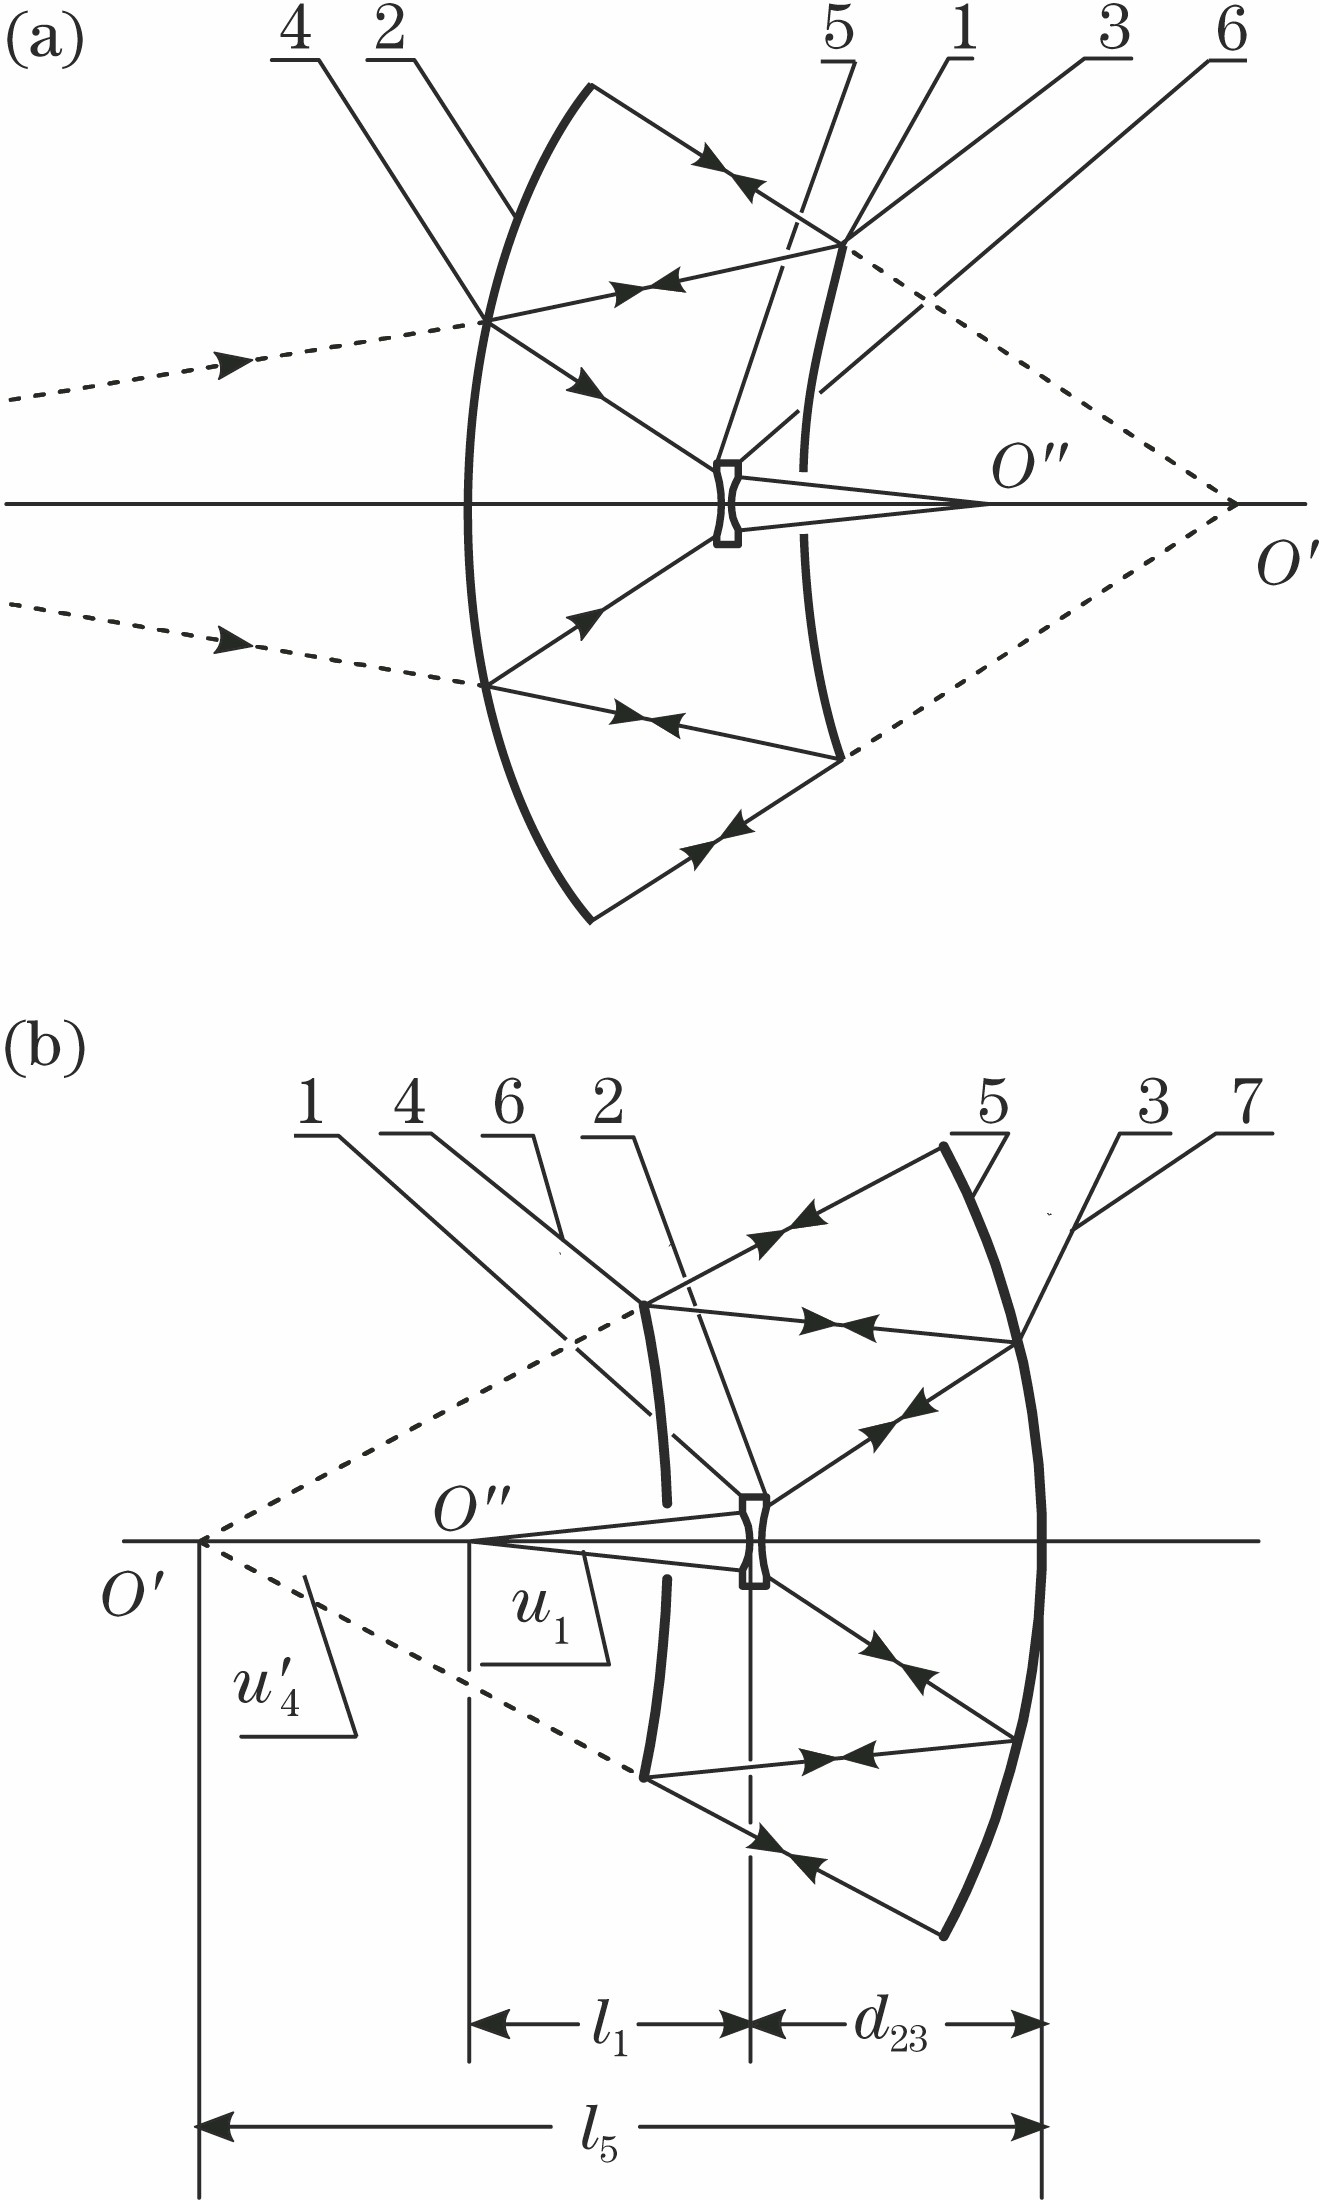 Catadioptric testing for the convex hyperboloid surface. (a) Schematic diagram; (b) layout of actual optical path